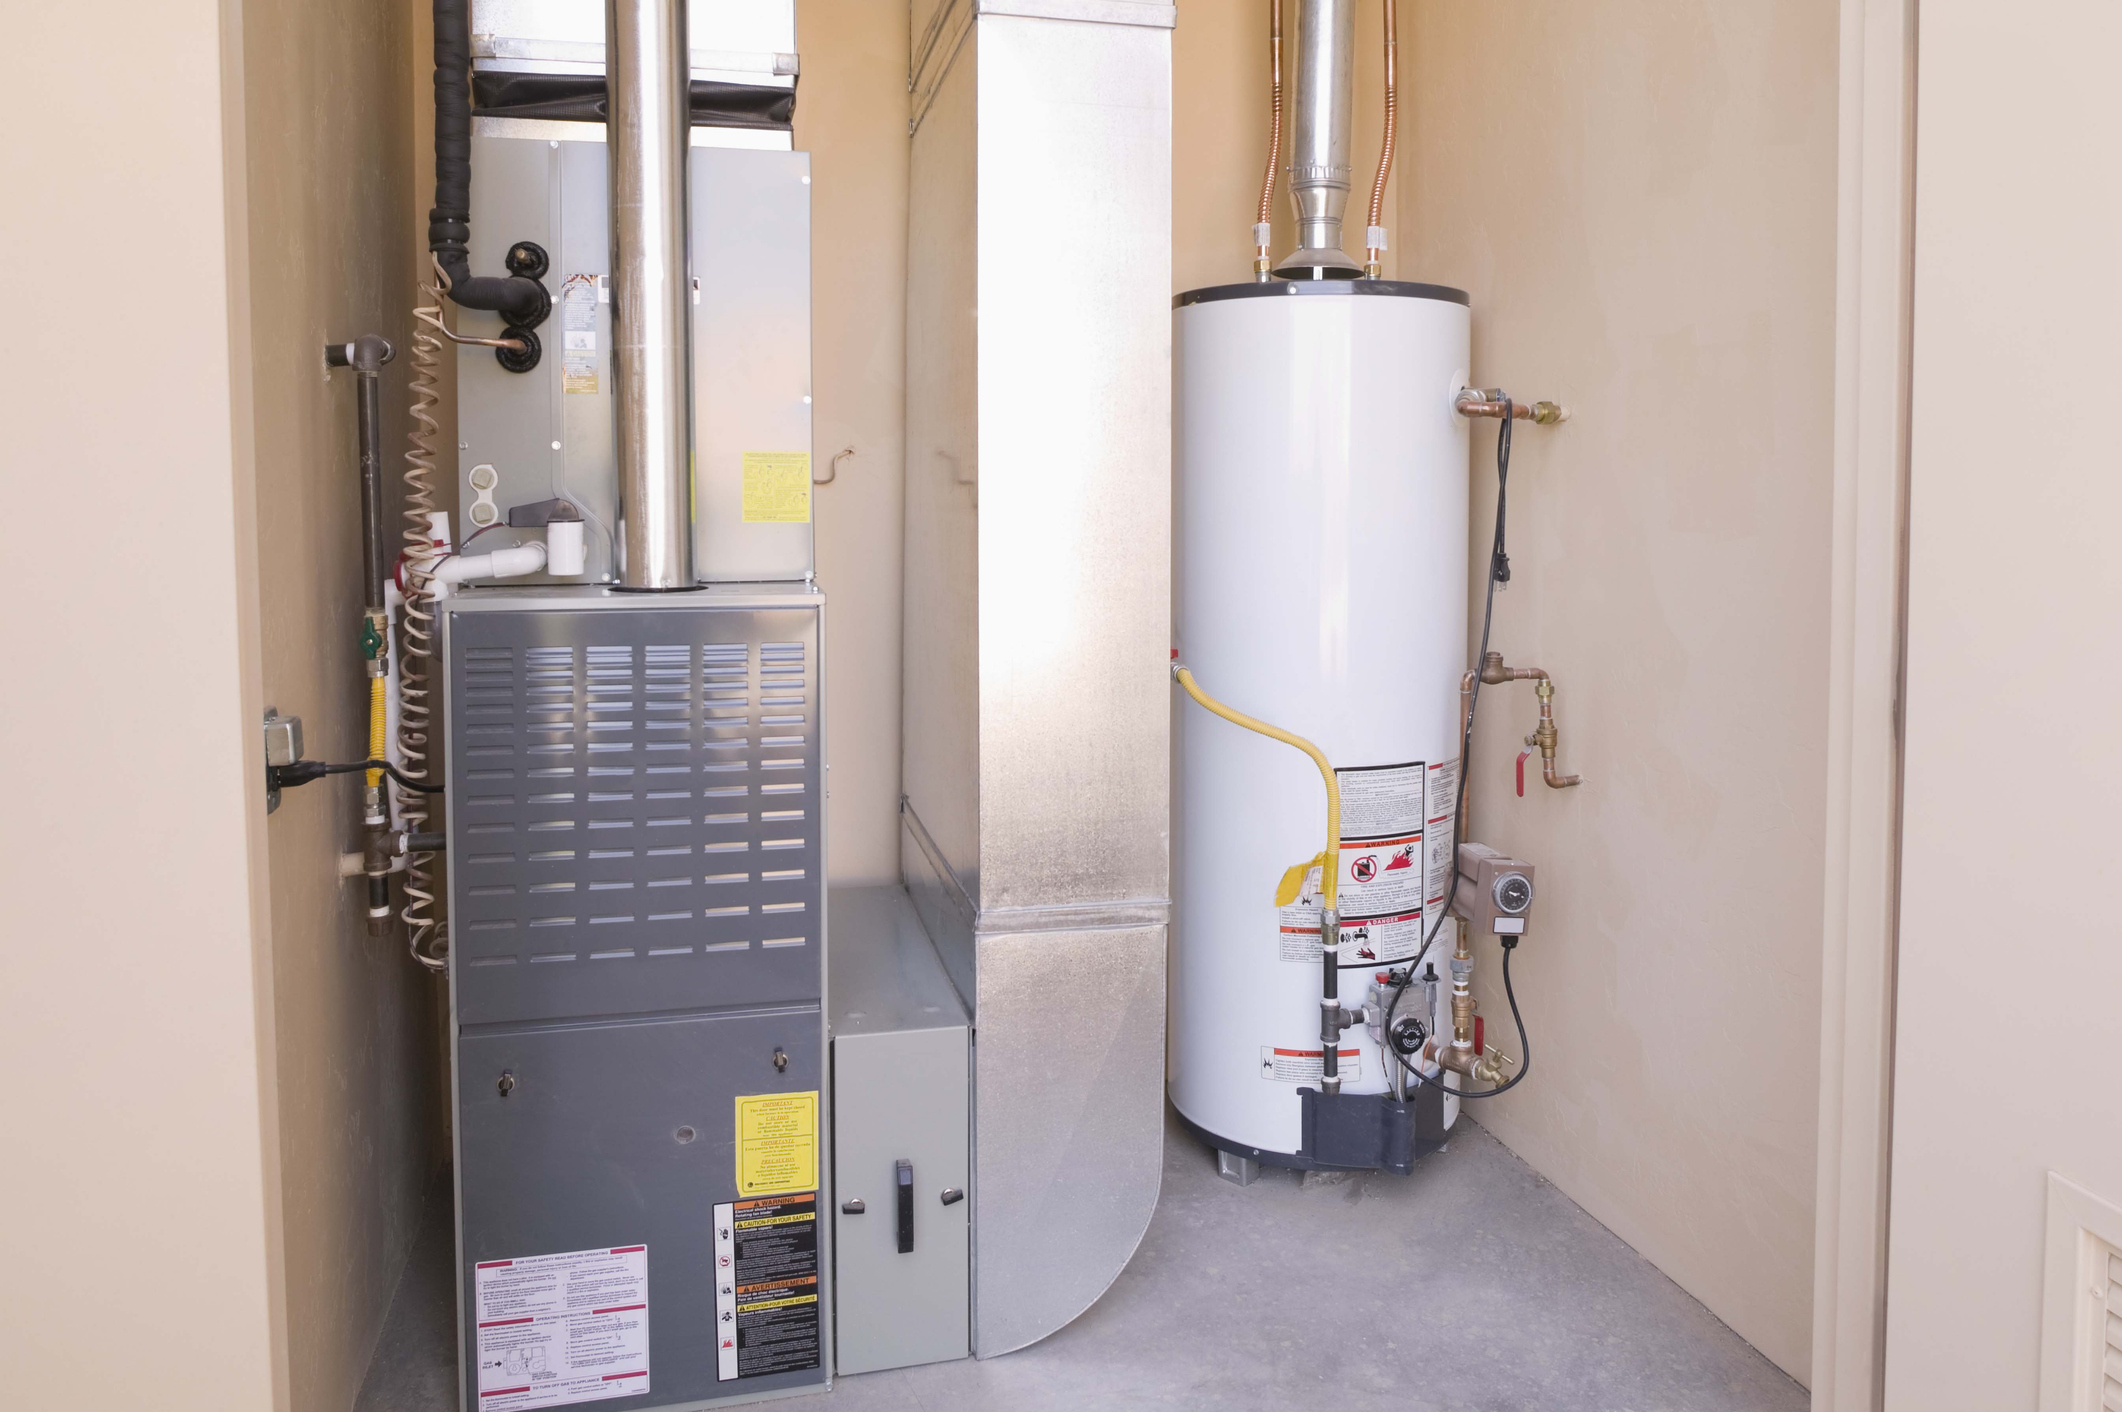 What Is The Average Life Expectancy of A Residential Furnace?